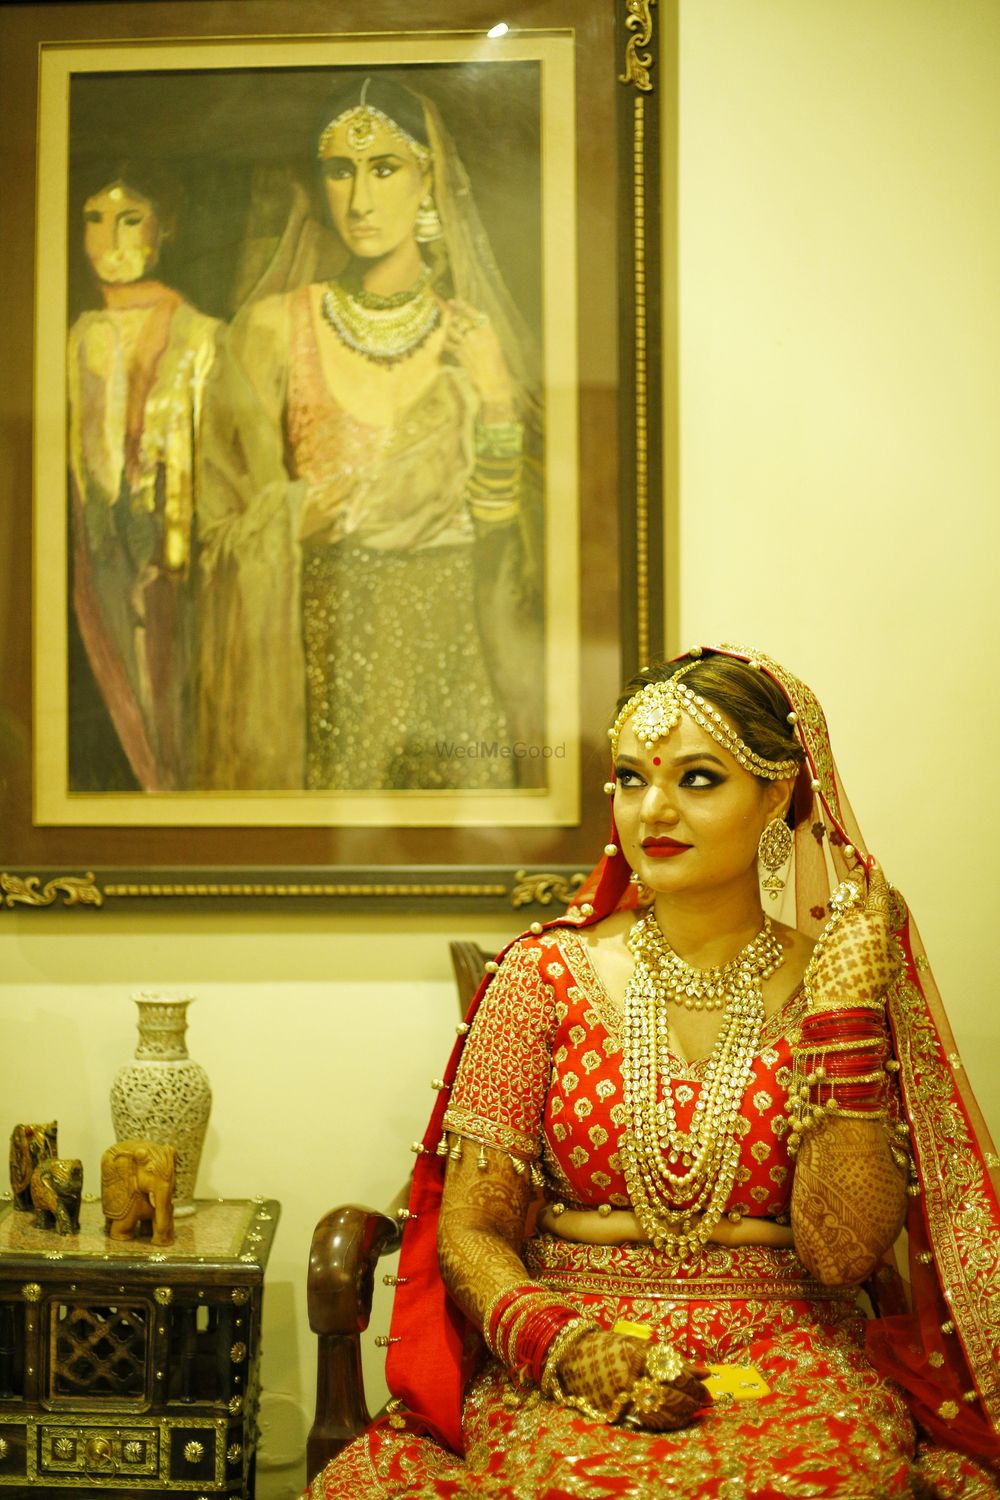 Photo From Brides - By Divyani Professional Make up and Hair